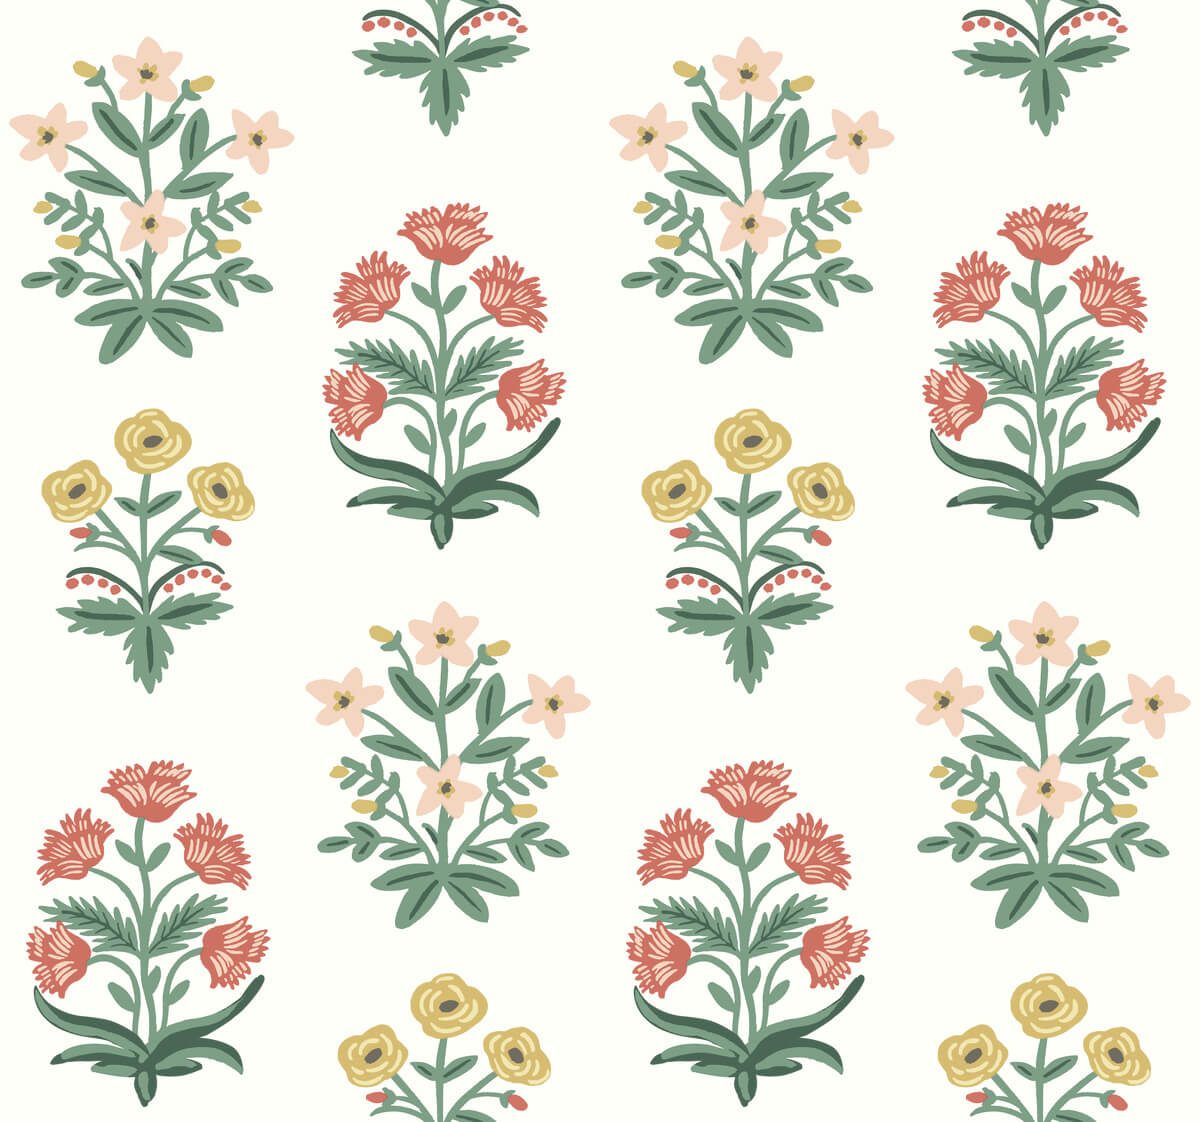 Rifle Paper Co. Second Edition Mughal Rose Wallpaper - SAMPLE